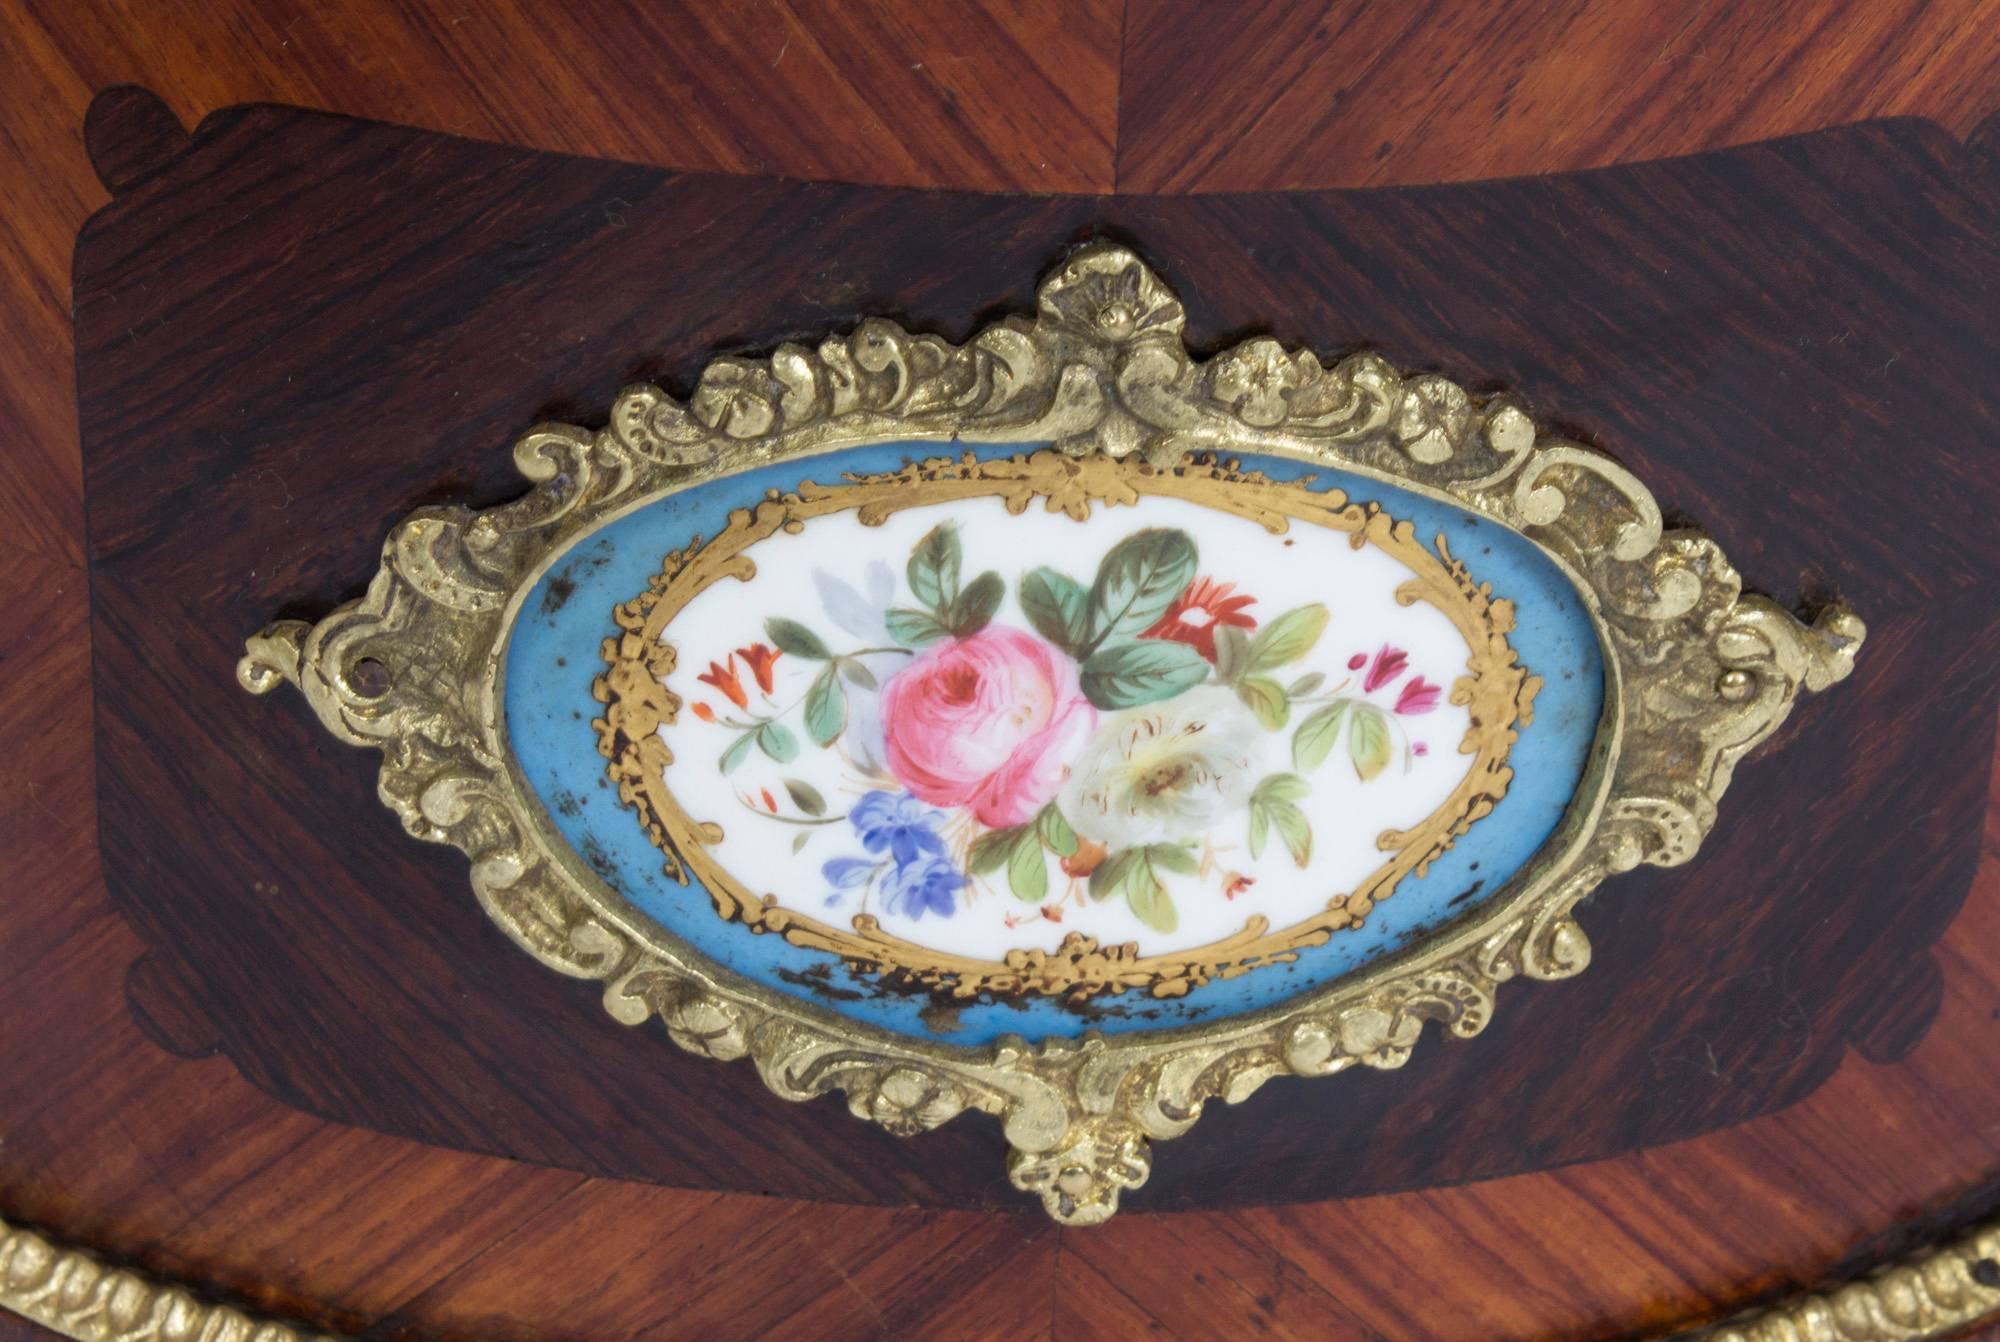 This is a beautiful antique French ormolu and Sèvres porcelain mounted, kingwood jardiniere, circa 1870 in date.

The jardiniere is serpentine in shape with ormolu mounts enclosing enchanting floral hand-painted Sèvres Porcelain plaques,